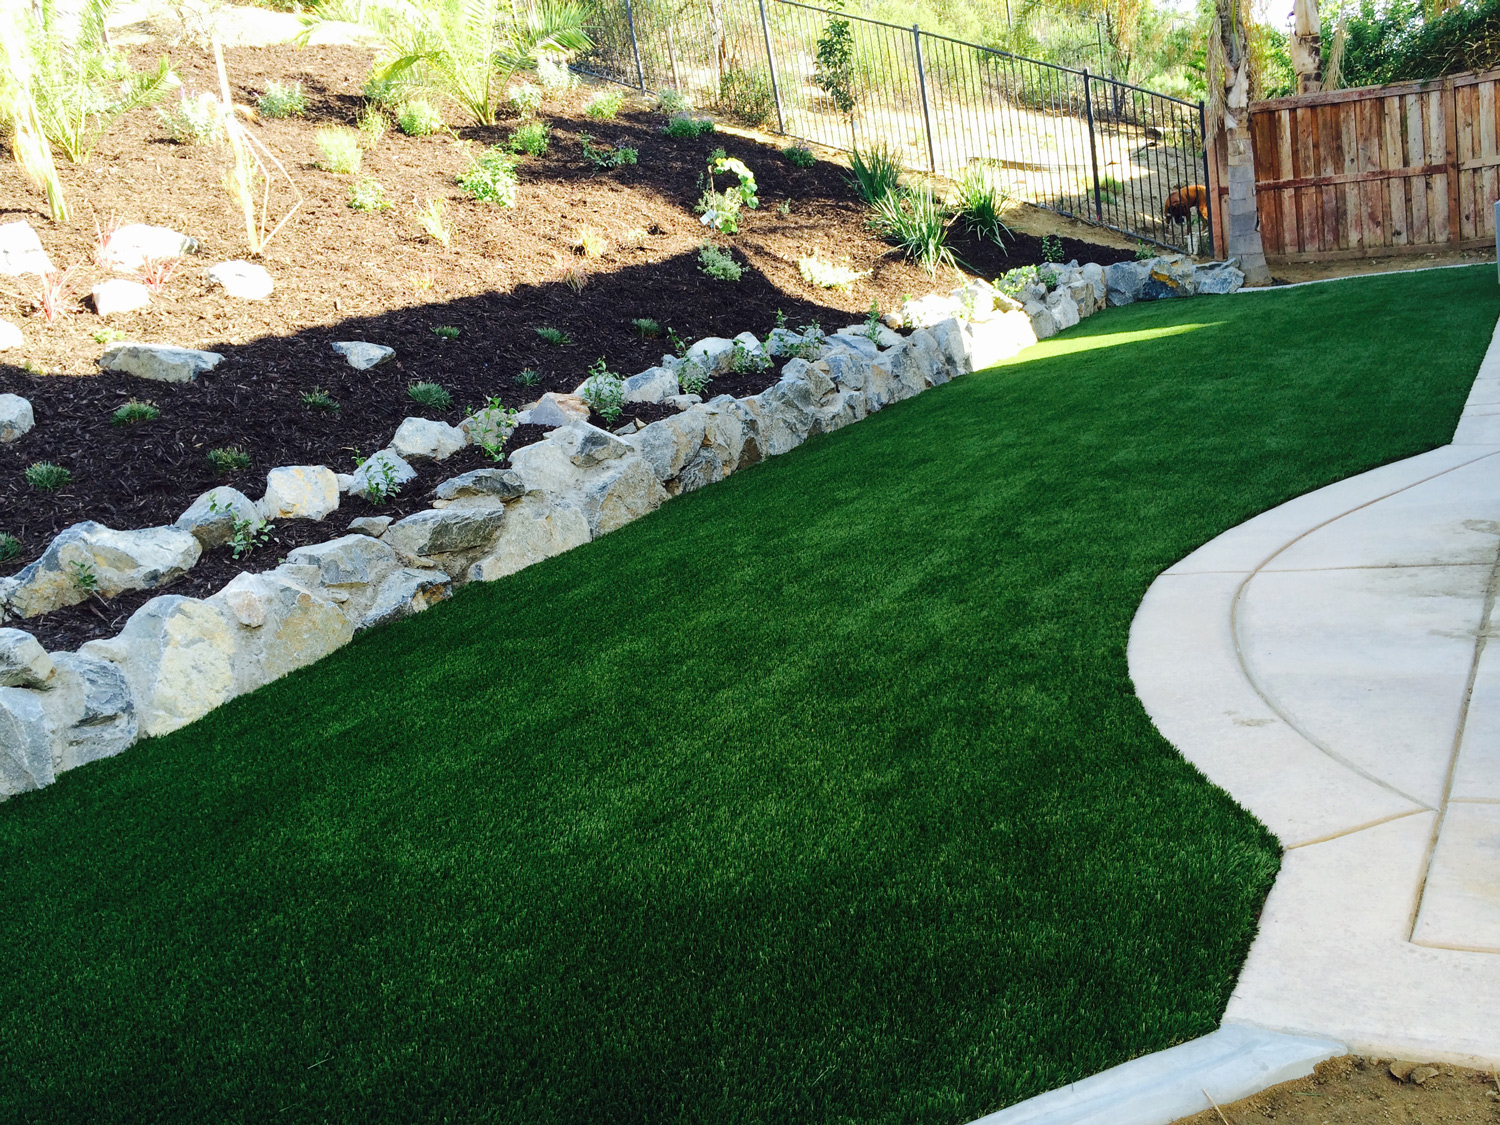 Backyard landscaping with green grass and hillside mulch beds and plants.